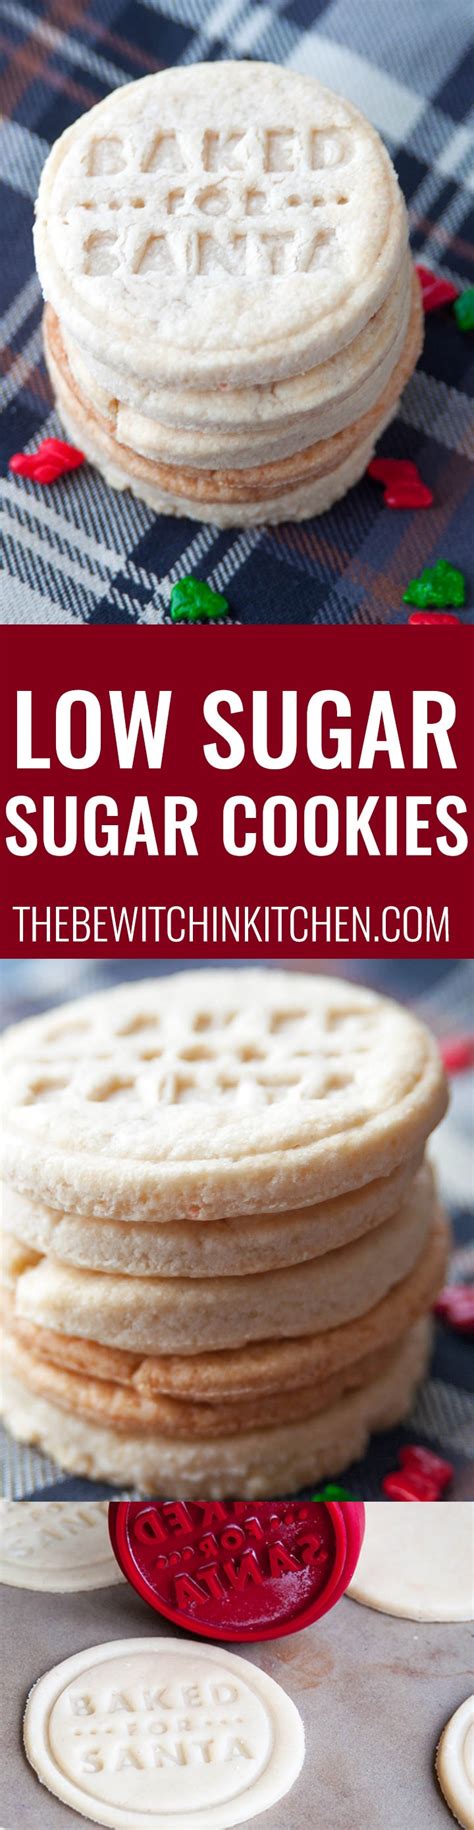 They don't taste low sugar and produce a very soft flavorful cookie. Low Sugar Cookies Recipe | The Bewitchin' Kitchen